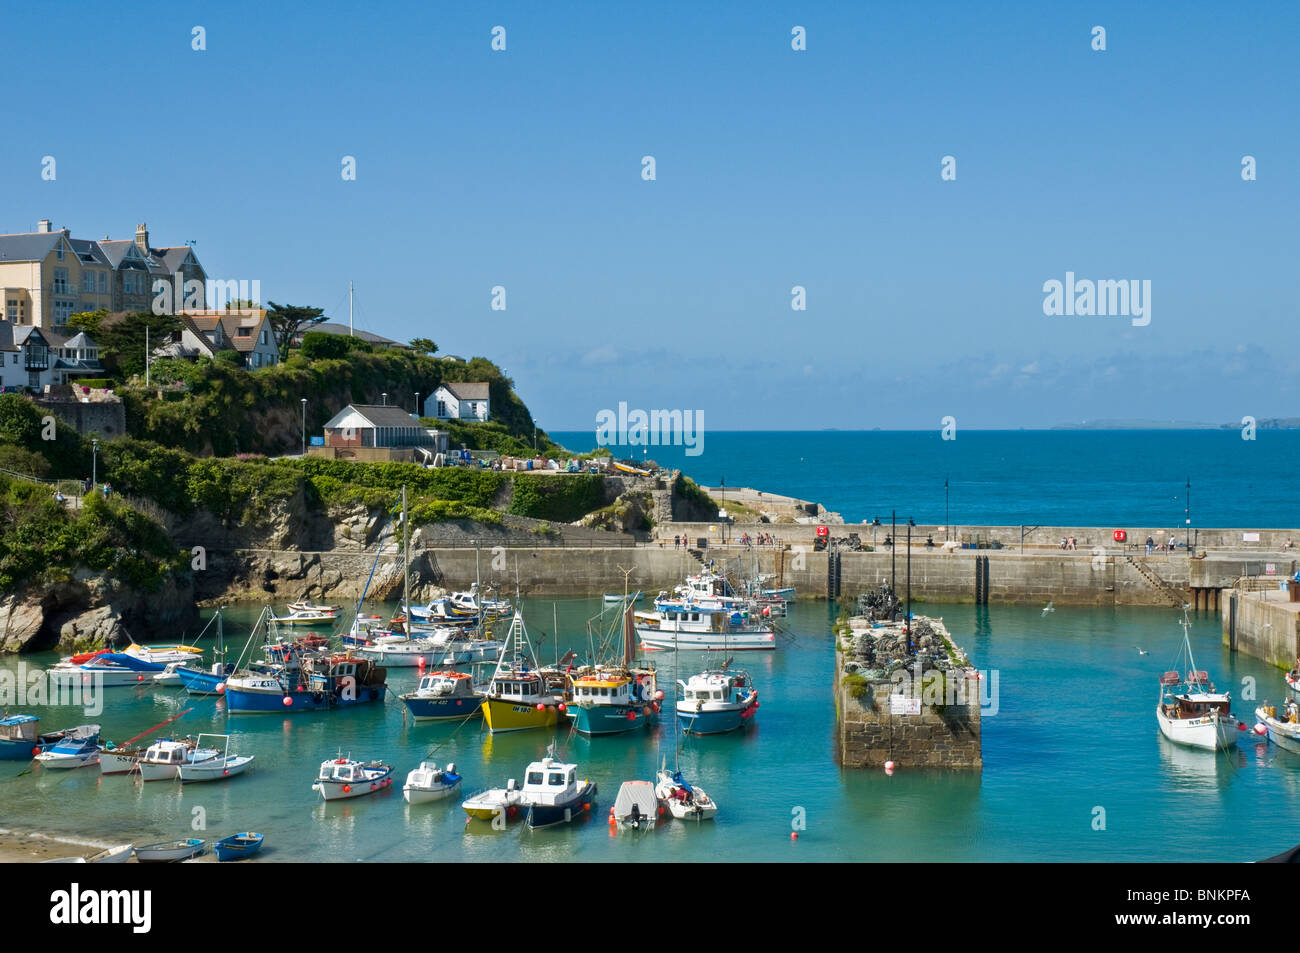 Fishing boats, boats and yachts in harbour Newquay Cornwall England Stock Photo